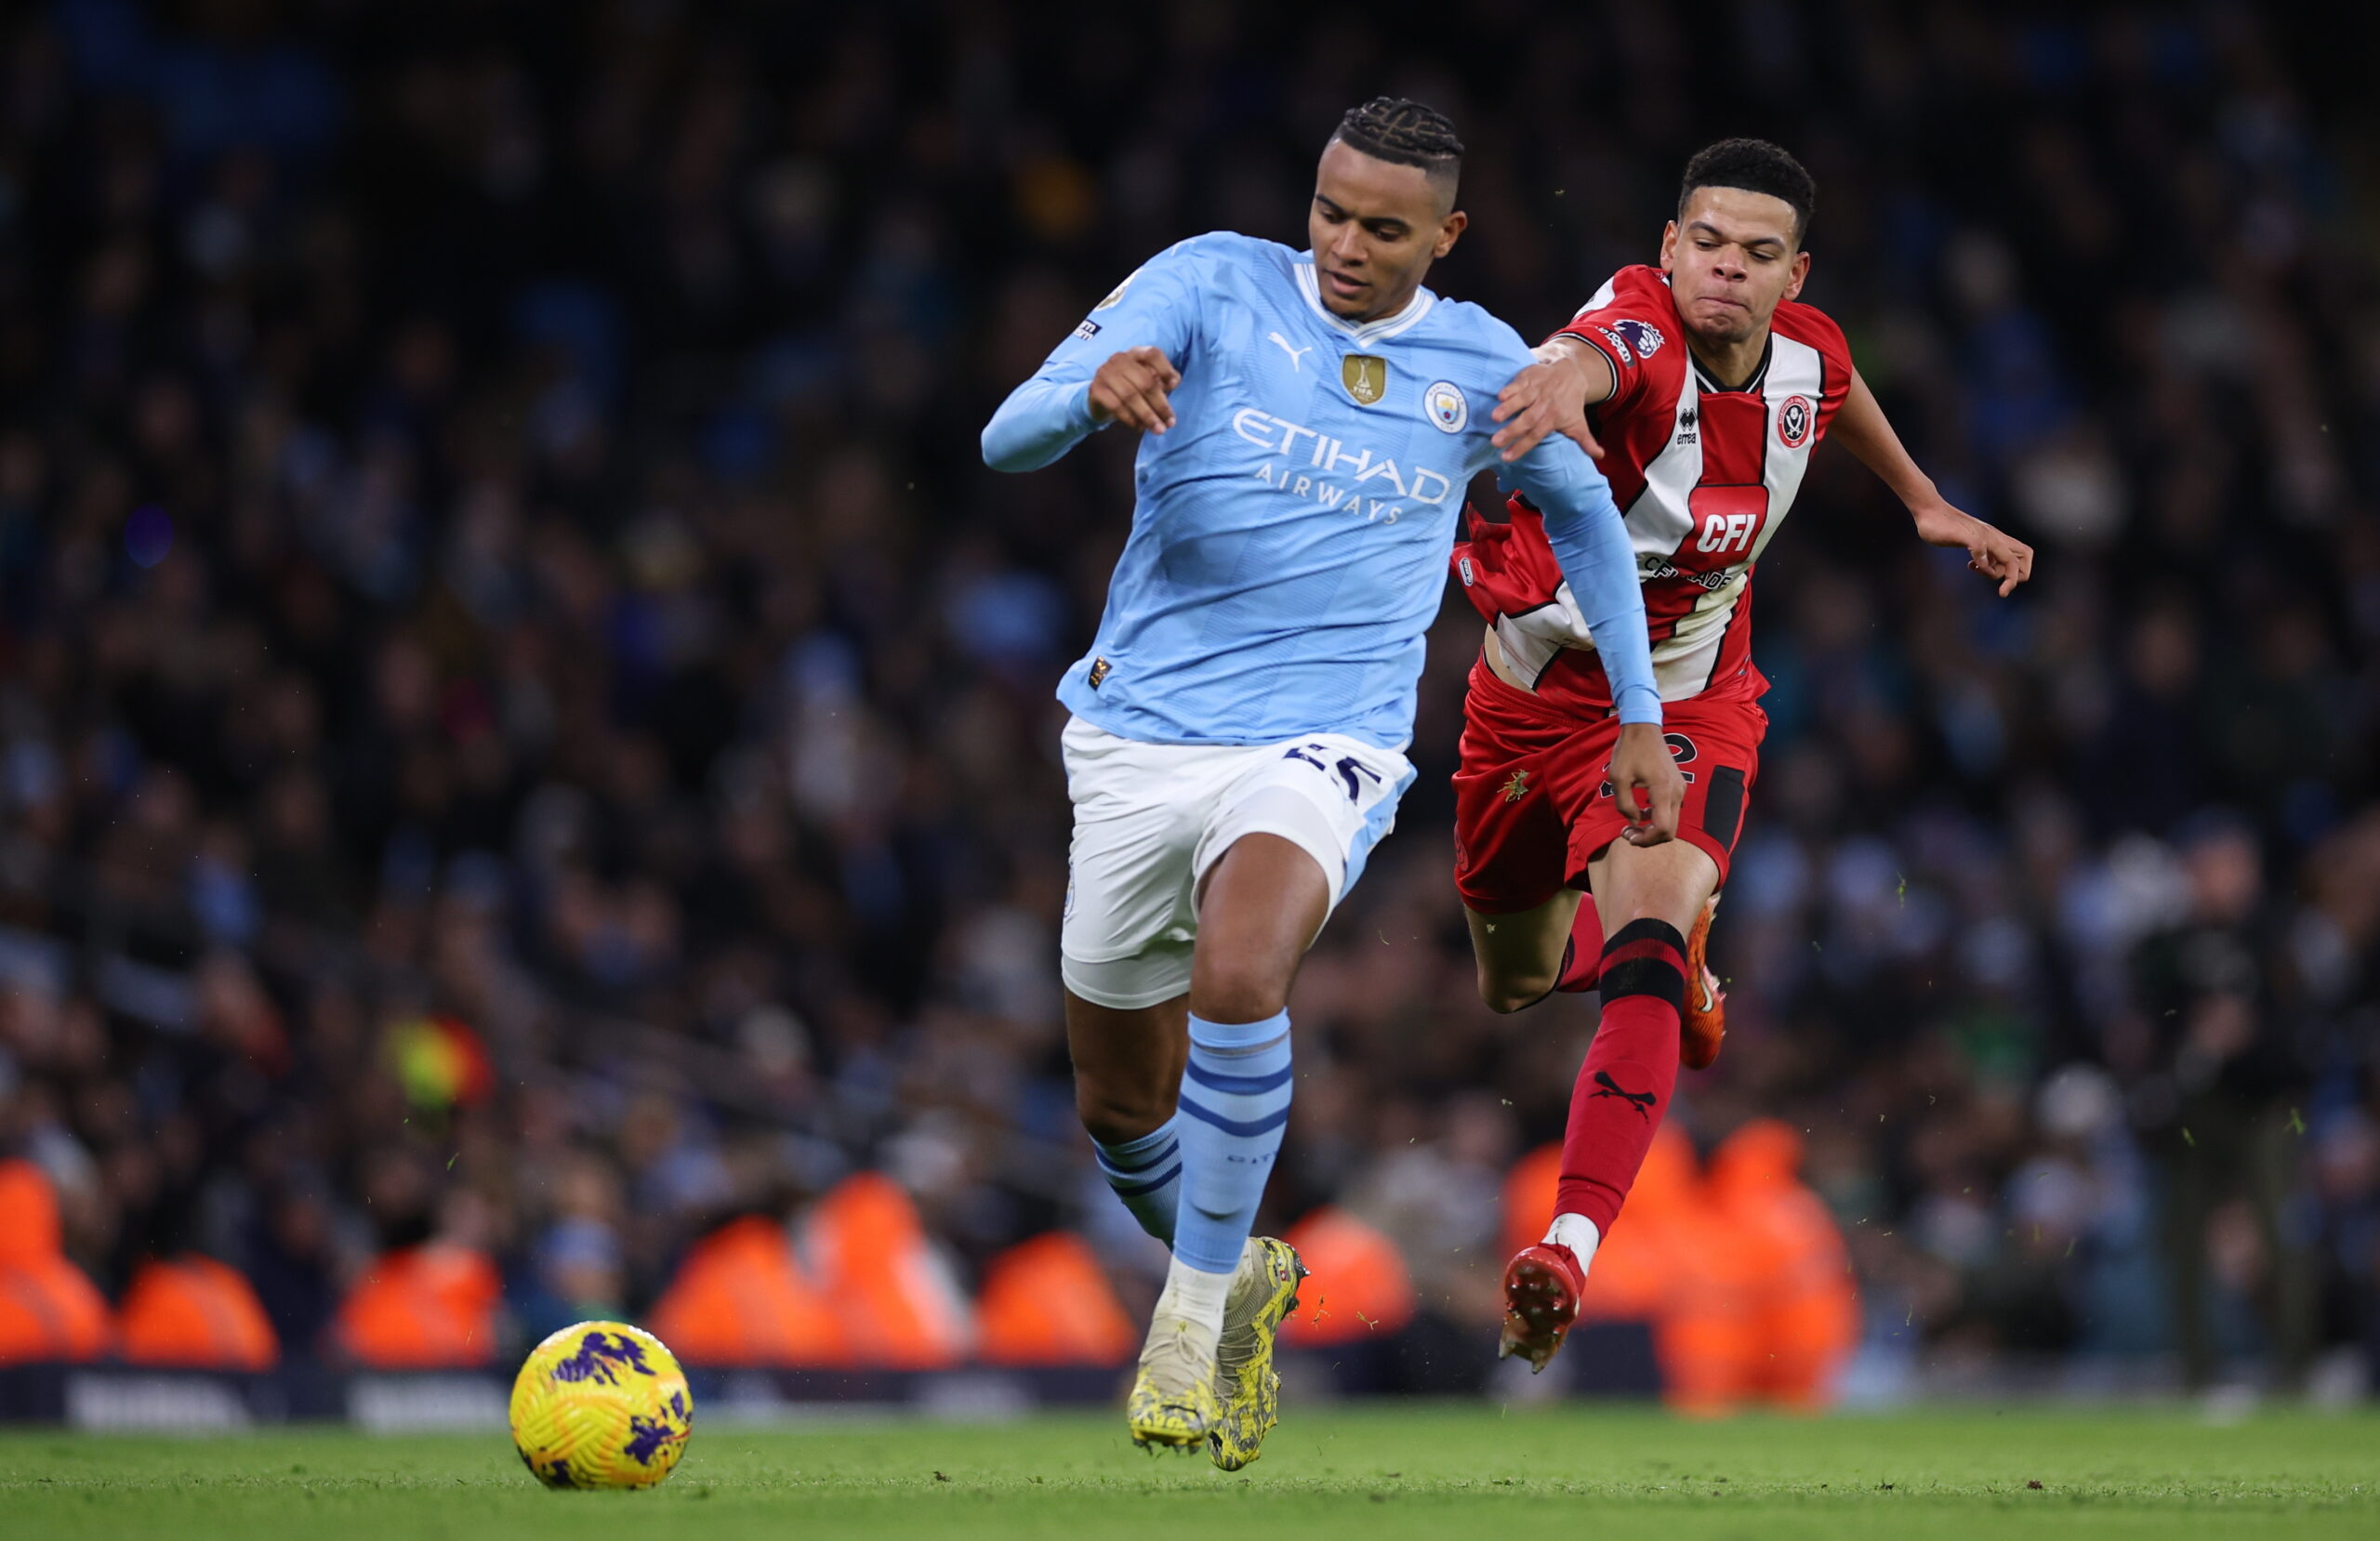 epa11049608 Manuel Akanji of Manchester City (L) in action against William Osula of Sheffield United (R) during the English Premier League soccer match between Manchester City and Sheffield United in Manchester, Britain, 30 December 2023.  EPA/ADAM VAUGHAN EDITORIAL USE ONLY. No use with unauthorized audio, video, data, fixture lists, club/league logos or 'live' services. Online in-match use limited to 120 images, no video emulation. No use in betting, games or single club/league/player publications.